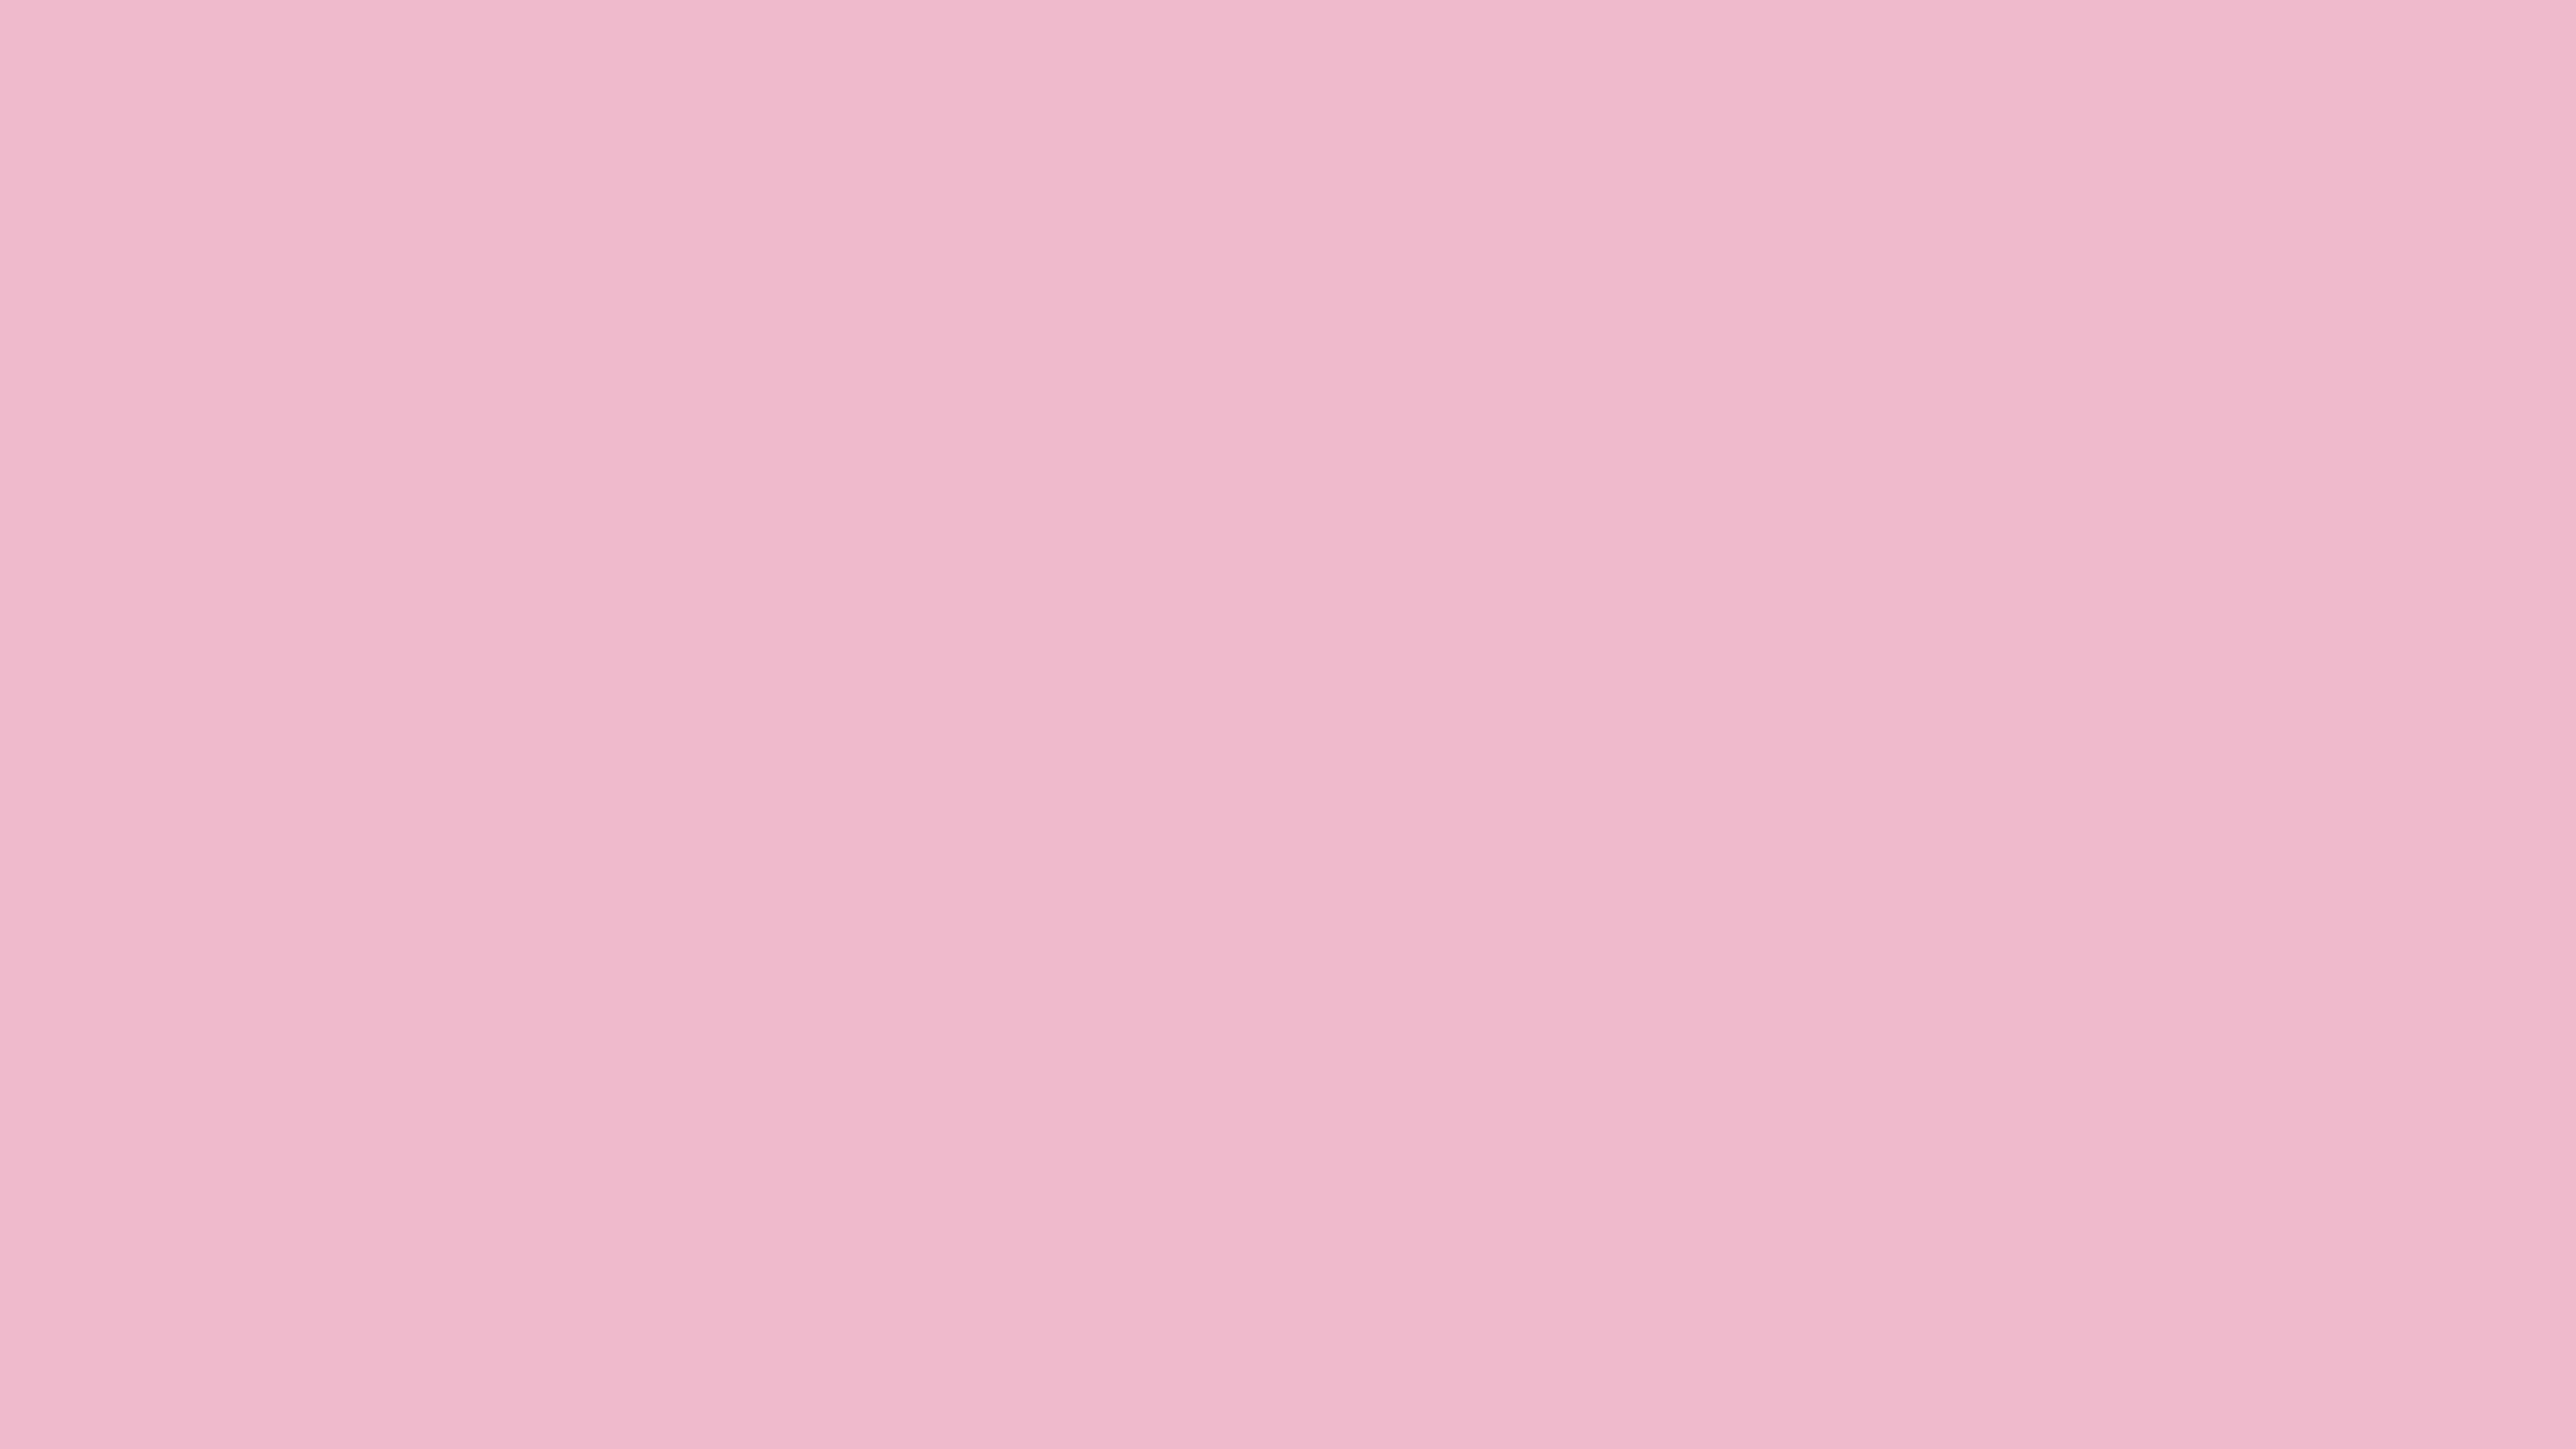 7680x4320 Cameo Pink Solid Color Background